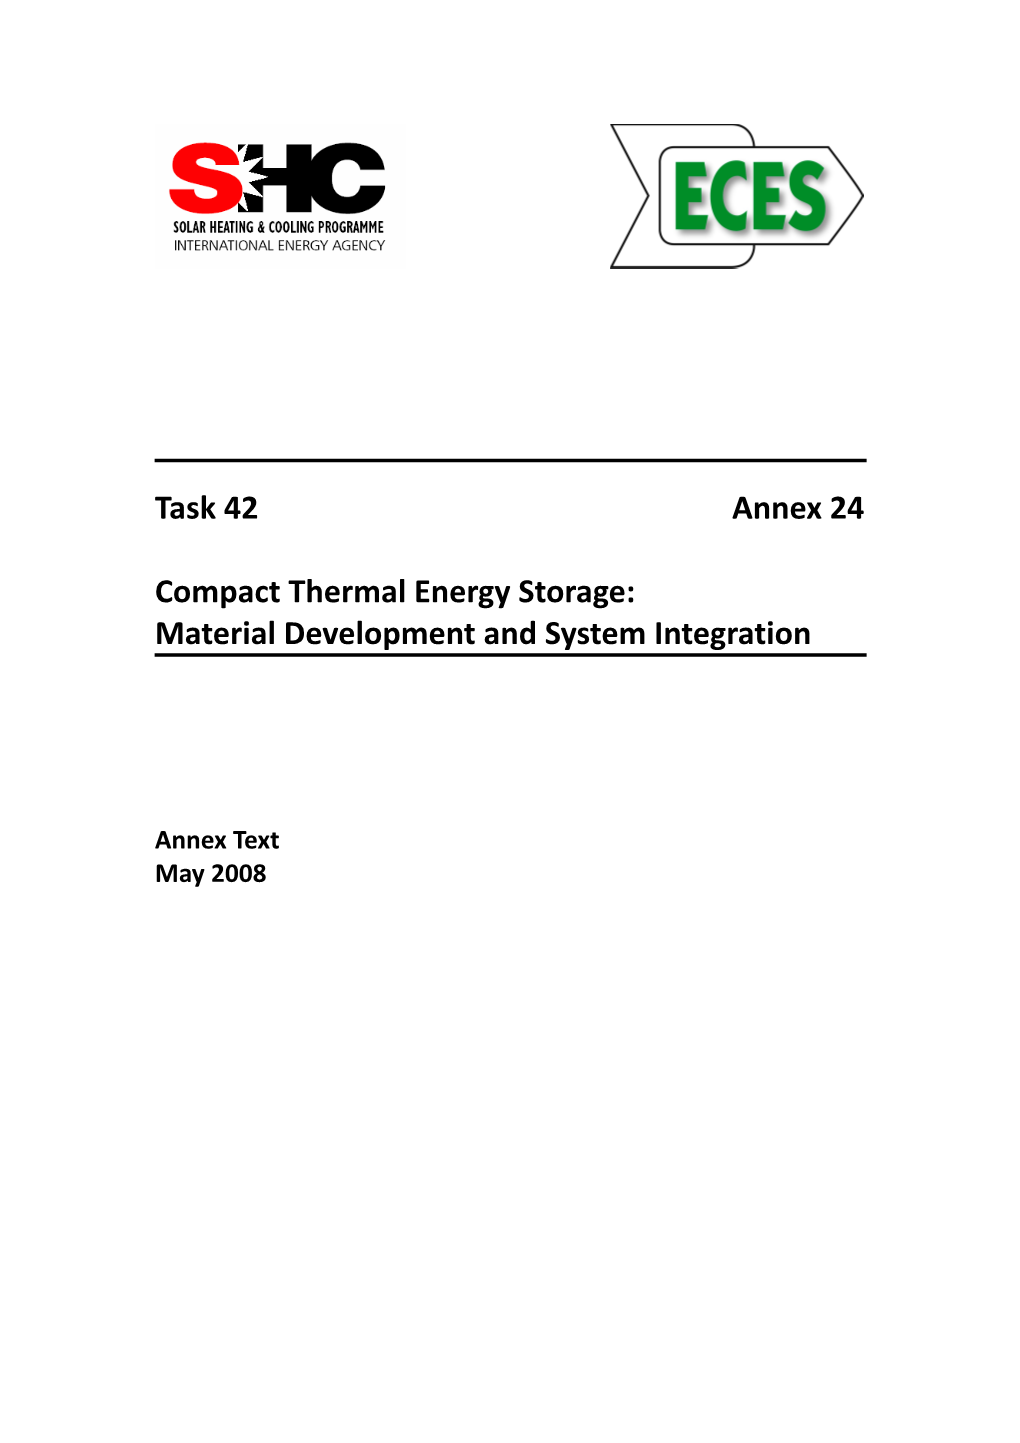 Compact Thermal Energy Storage